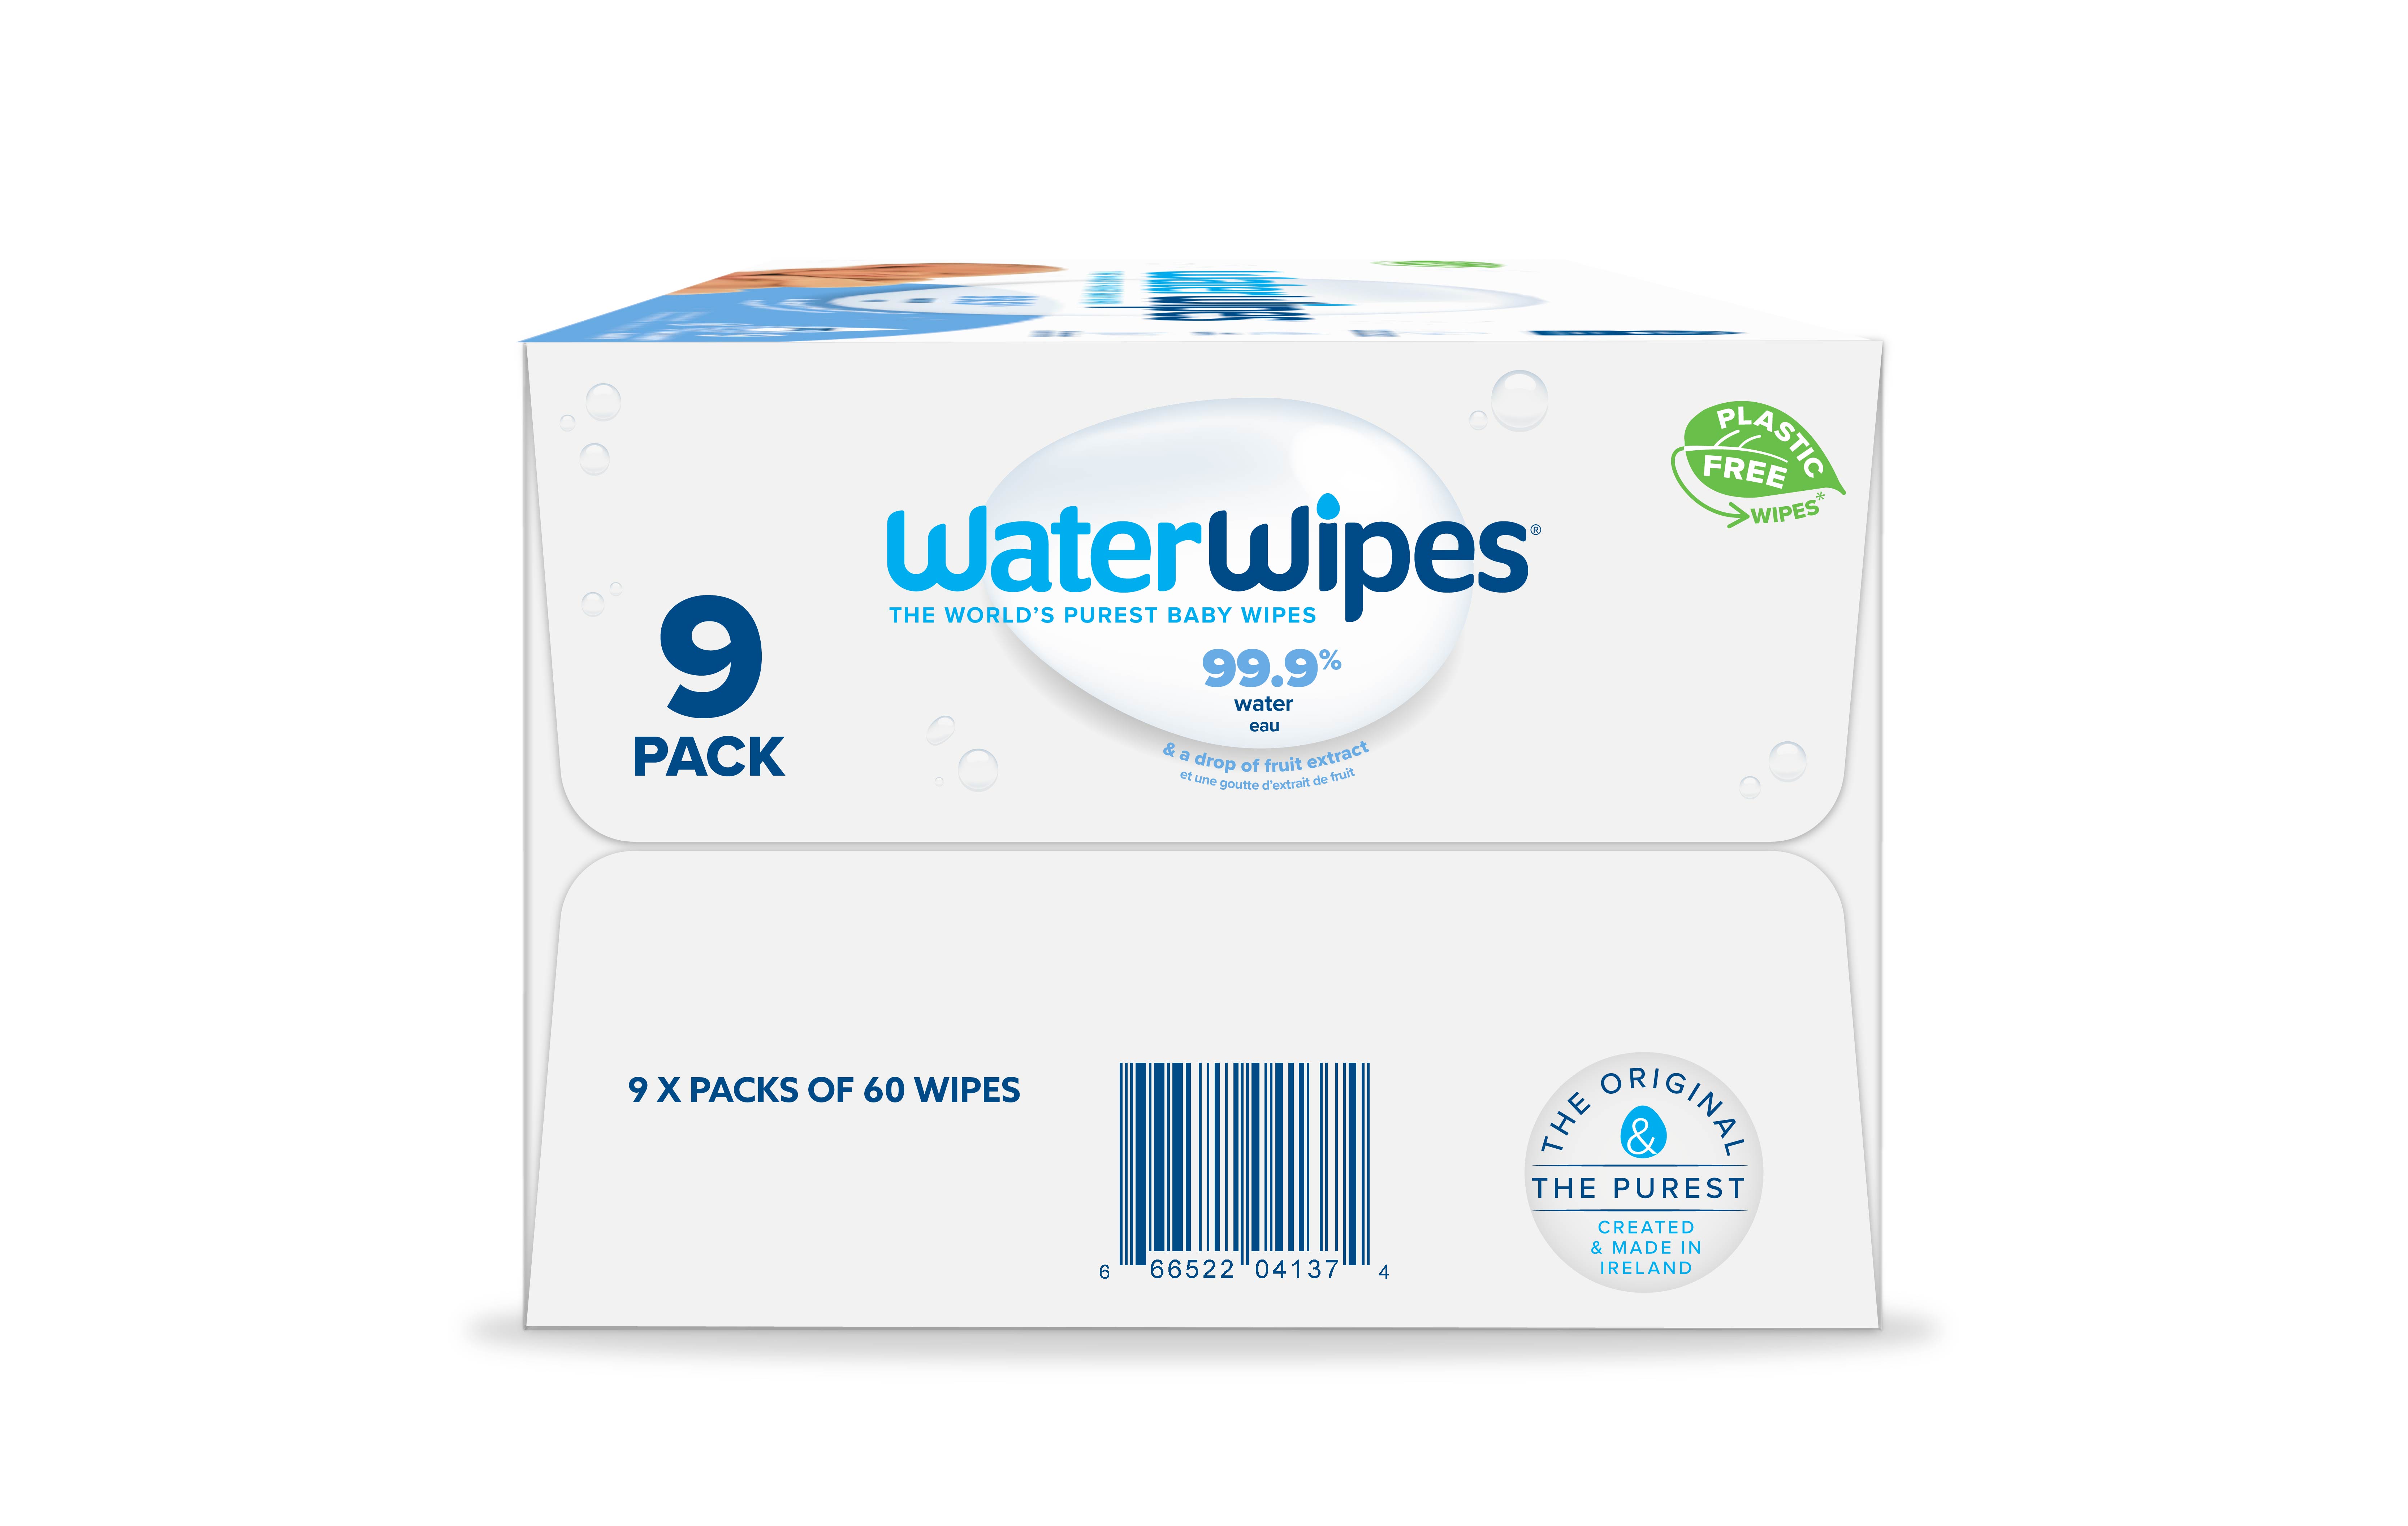 WaterWipes Plastic-Free Original 99.9% Water Based Baby Wipes, Fragrance-Free for Sensitive Skin, 540 Count (9 Packs) - image 5 of 10